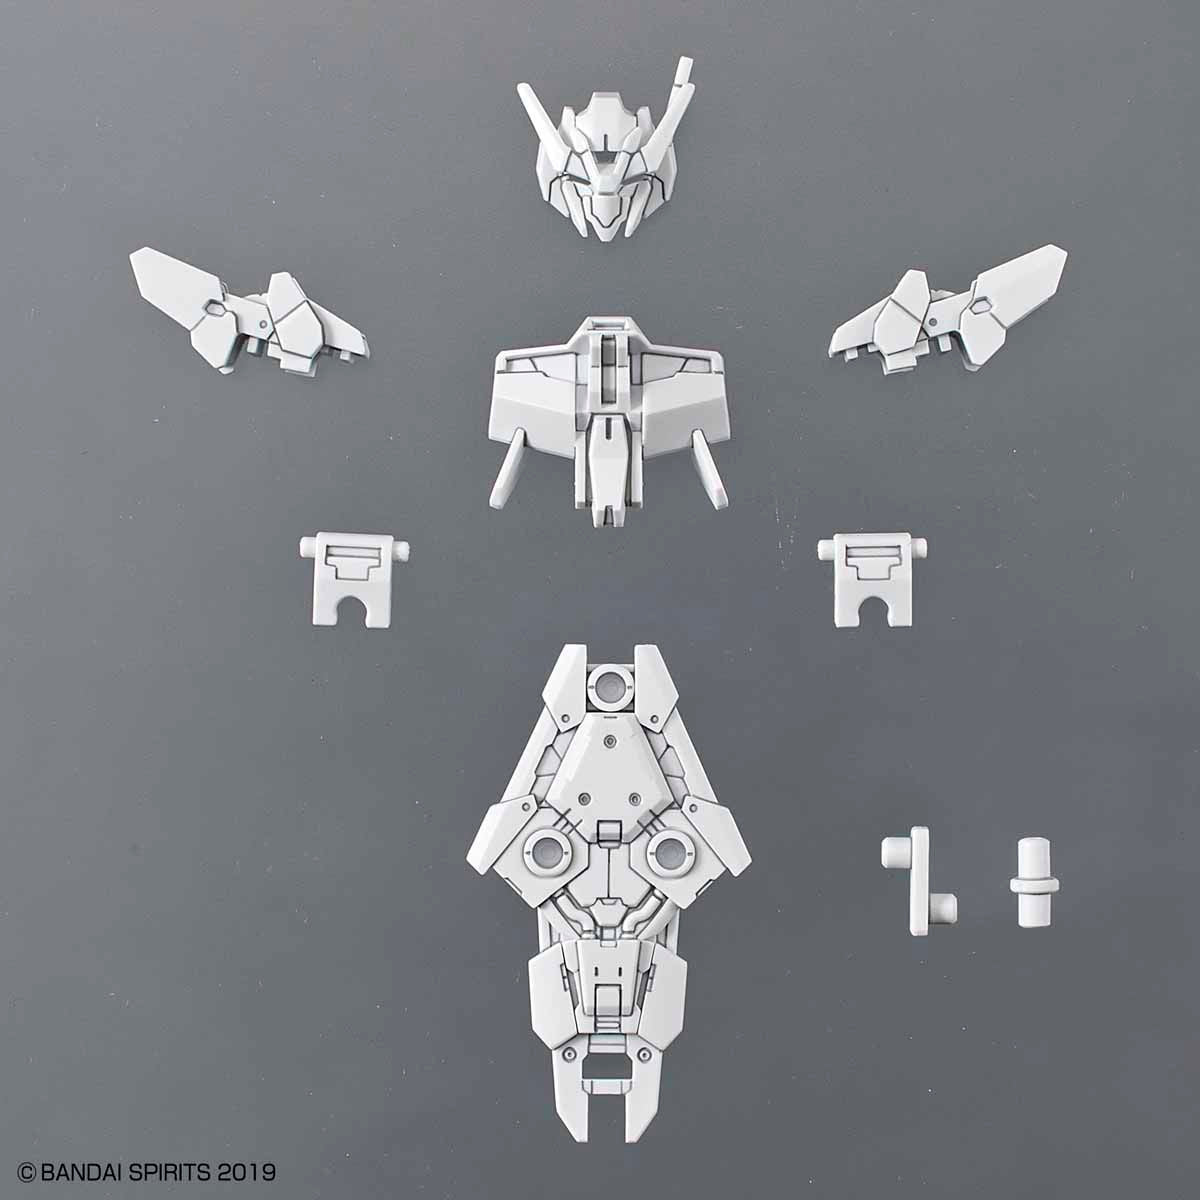 30MM 1/144 OPTION ARMOR FOR COMMANDER TYPE [ALTO EXCLUSIVE/ WHITE]